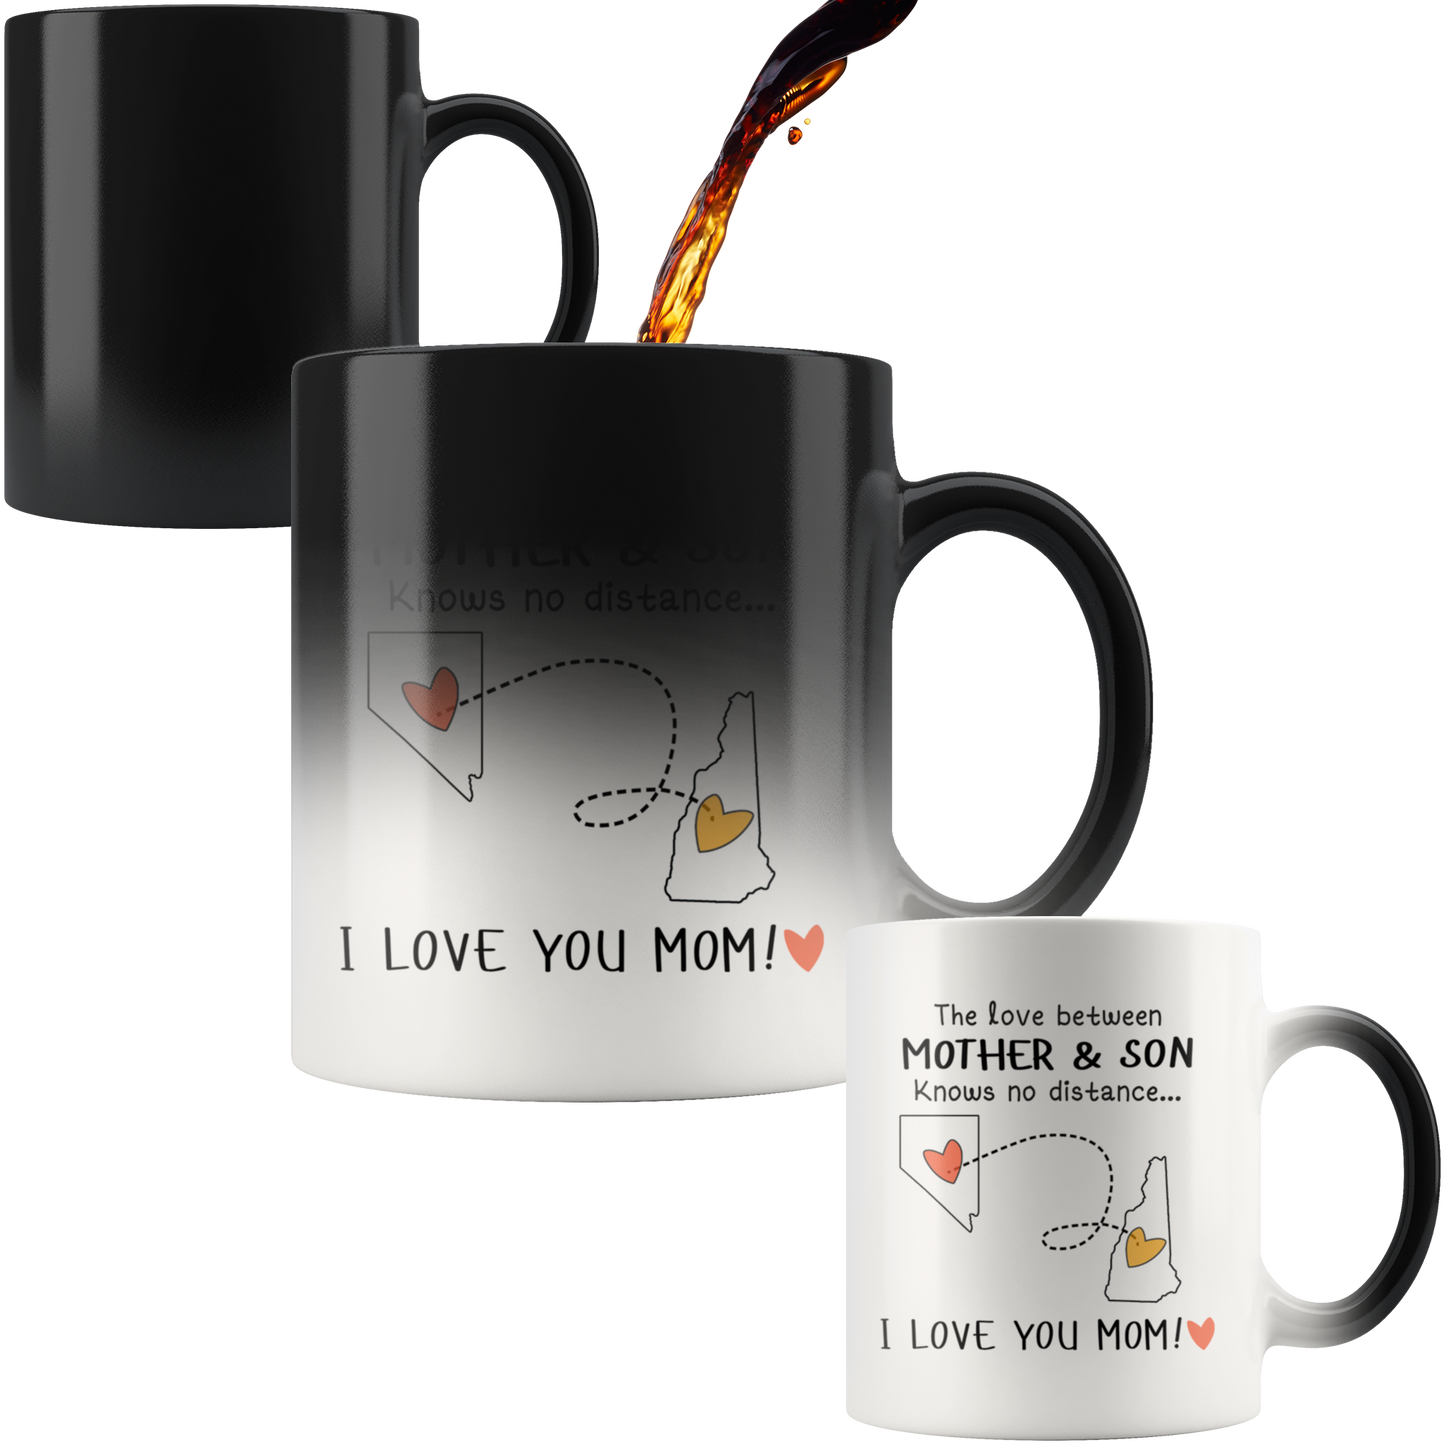 HNV-CUS-GRAND-sp-26524 - [ Nevada | New Hampshire ] (color_changing_mug_11oz) Mothers Day Gifts Personalized Mother Day Gifts Coffee Mug F